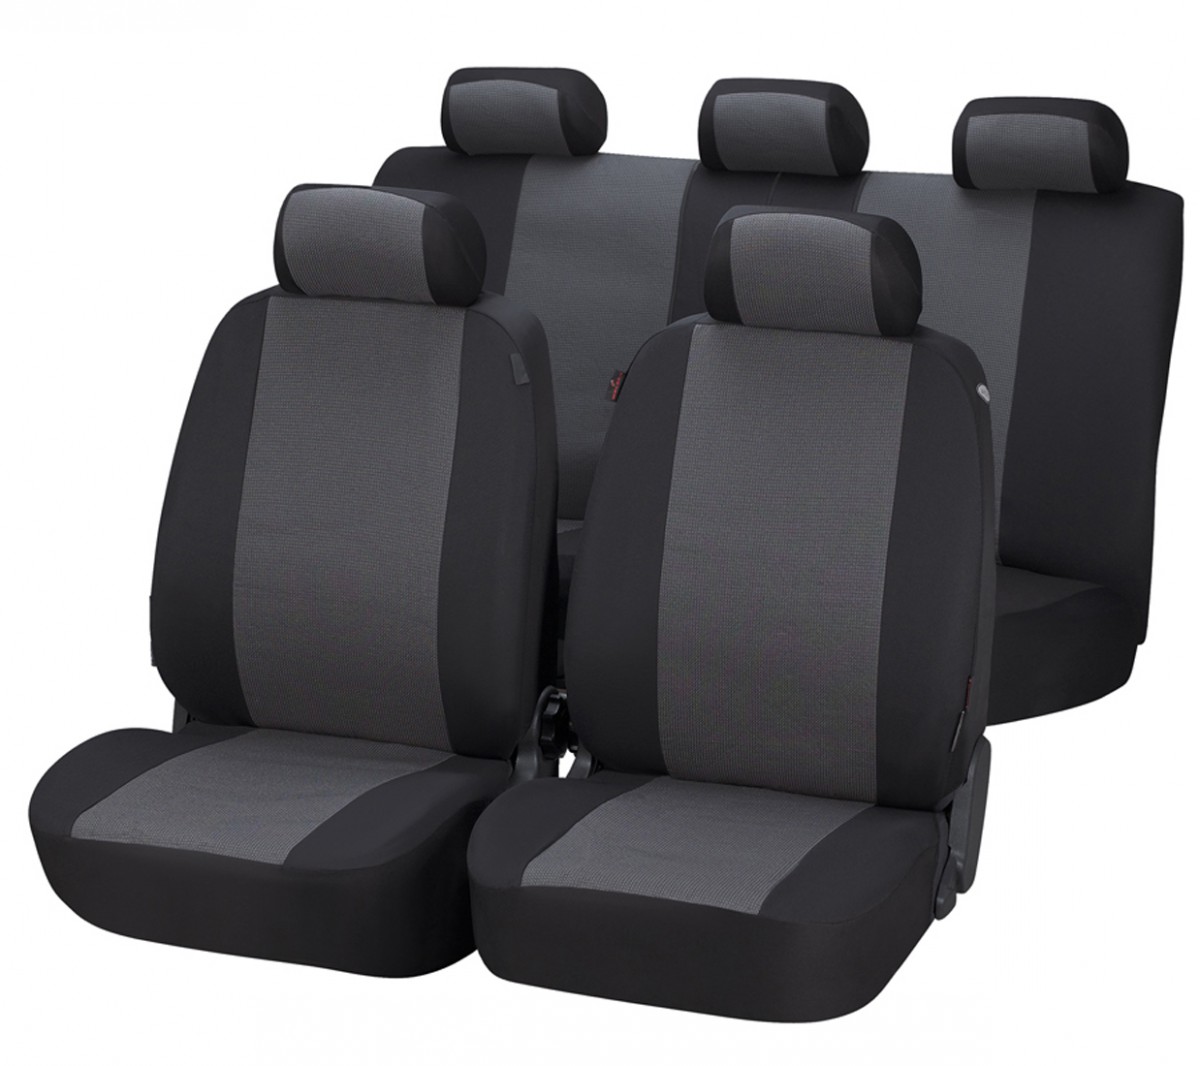 Vauxhall Complete seat covers Car seat covers , Proven Quality